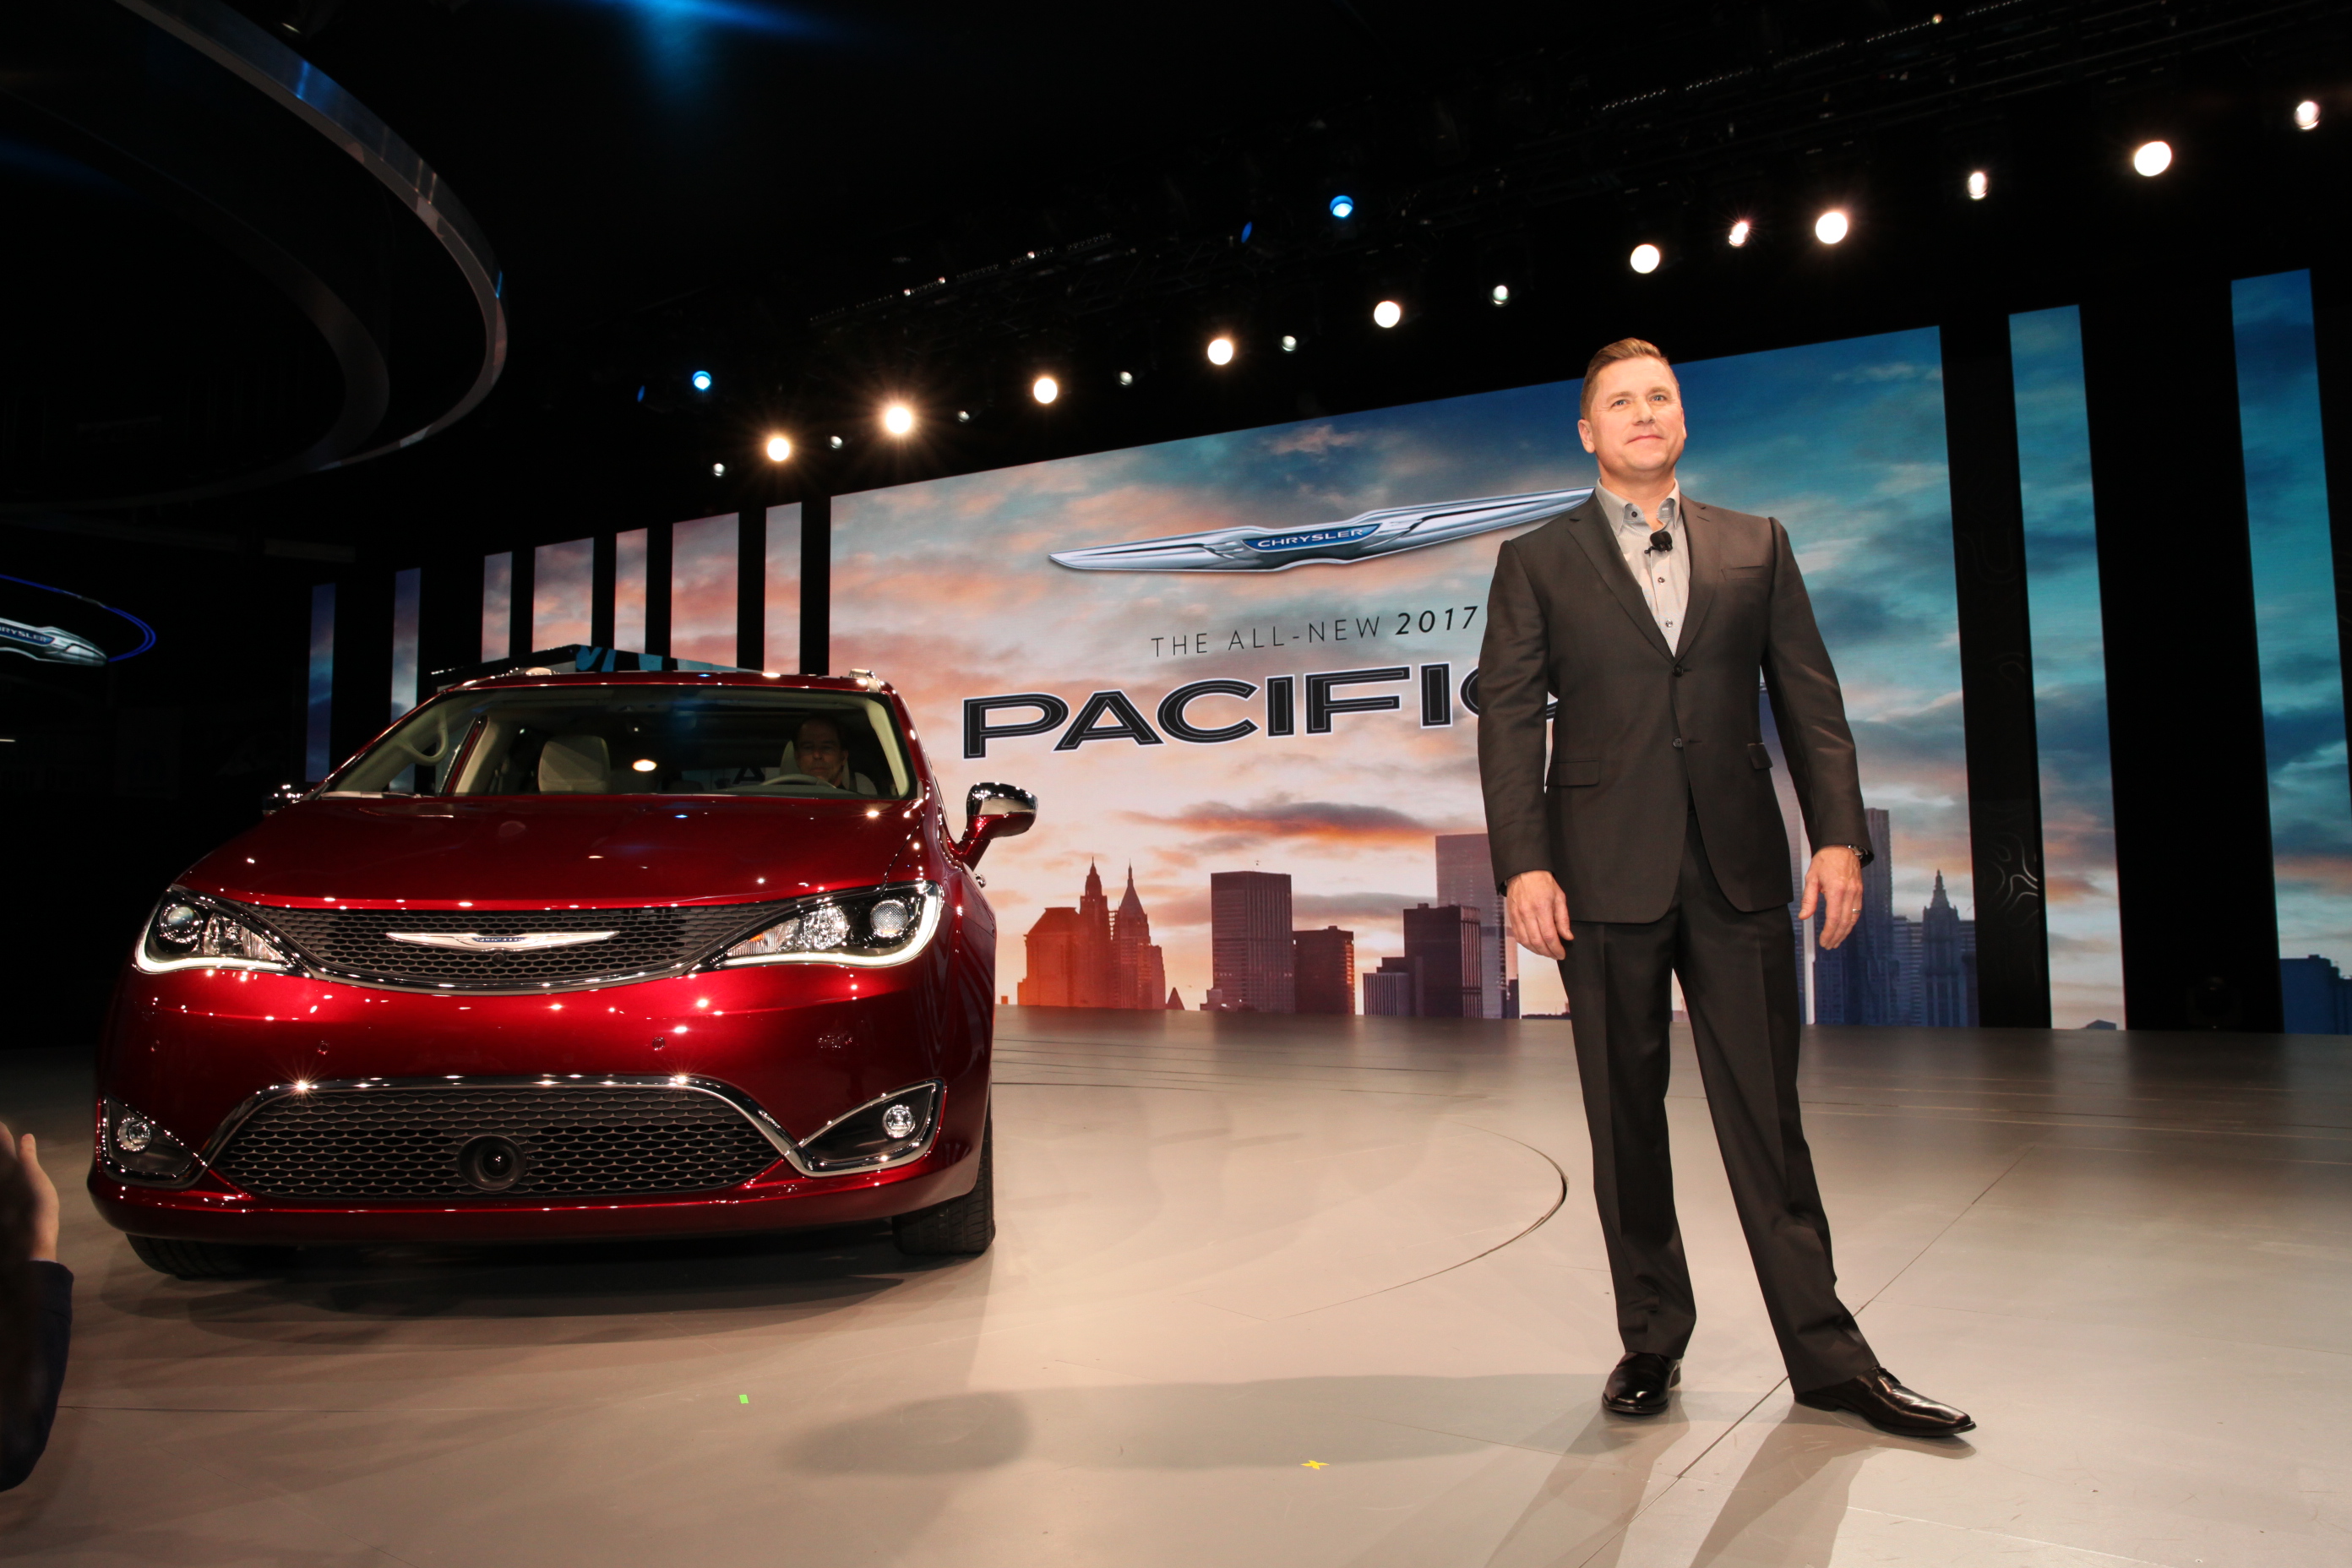 Head of Passenger Car Brands for Fiat Chrysler Automobiles, Tim Kuniskis with the new 2016 Chrysler Pacifica.